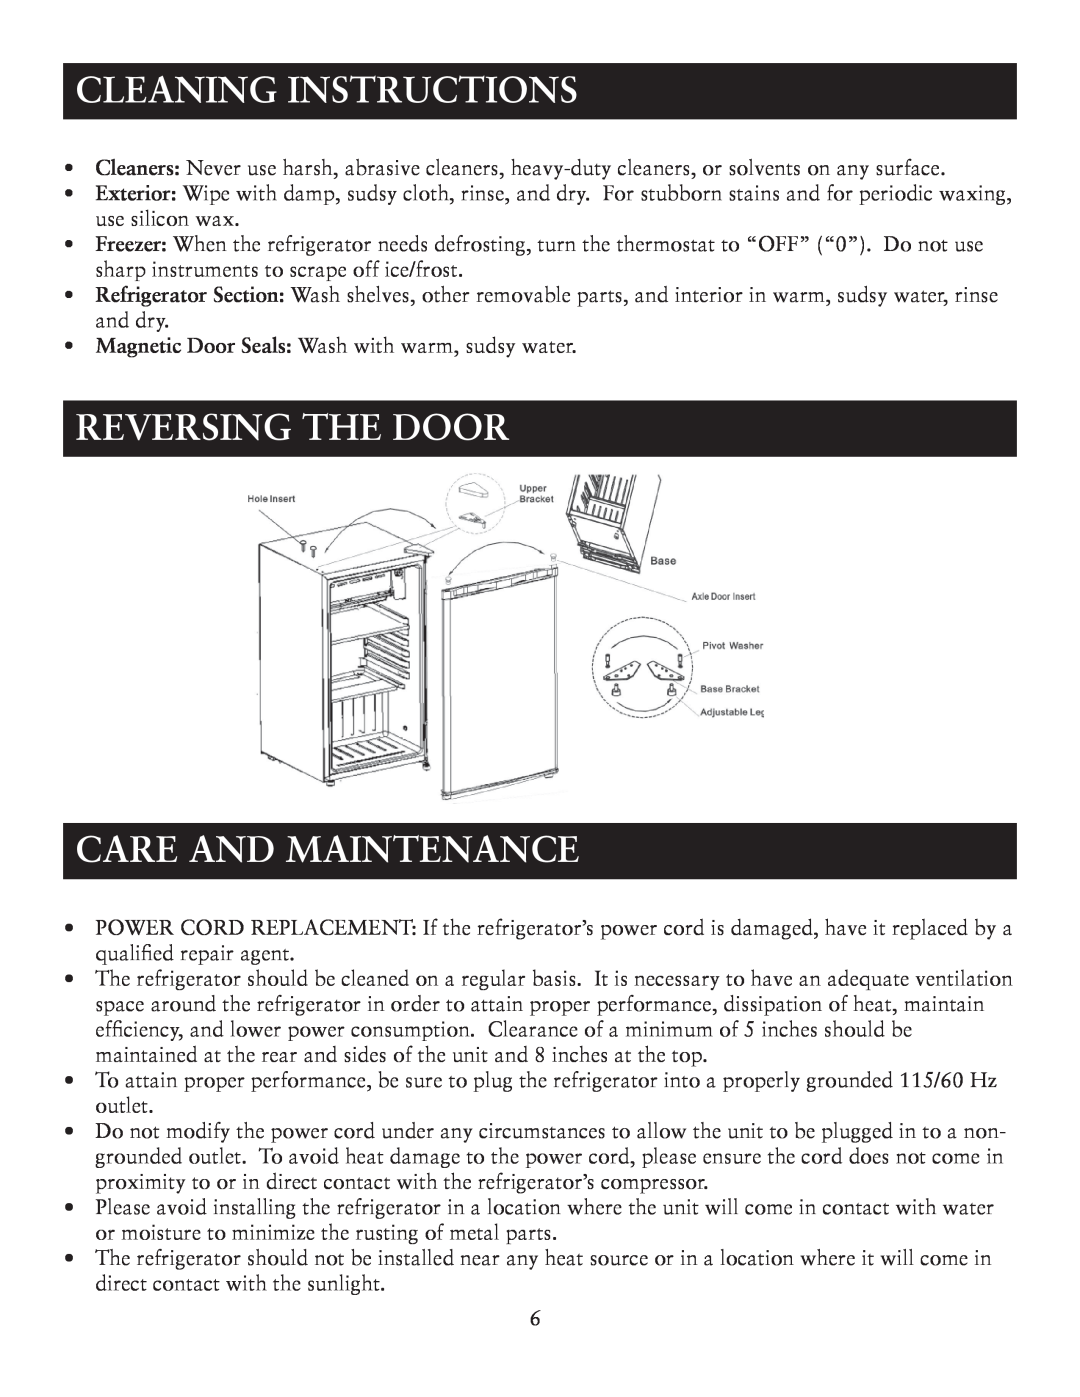 Oster OR03SCGBS user manual Cleaning Instructions, Reversing The Door Care And Maintenance 